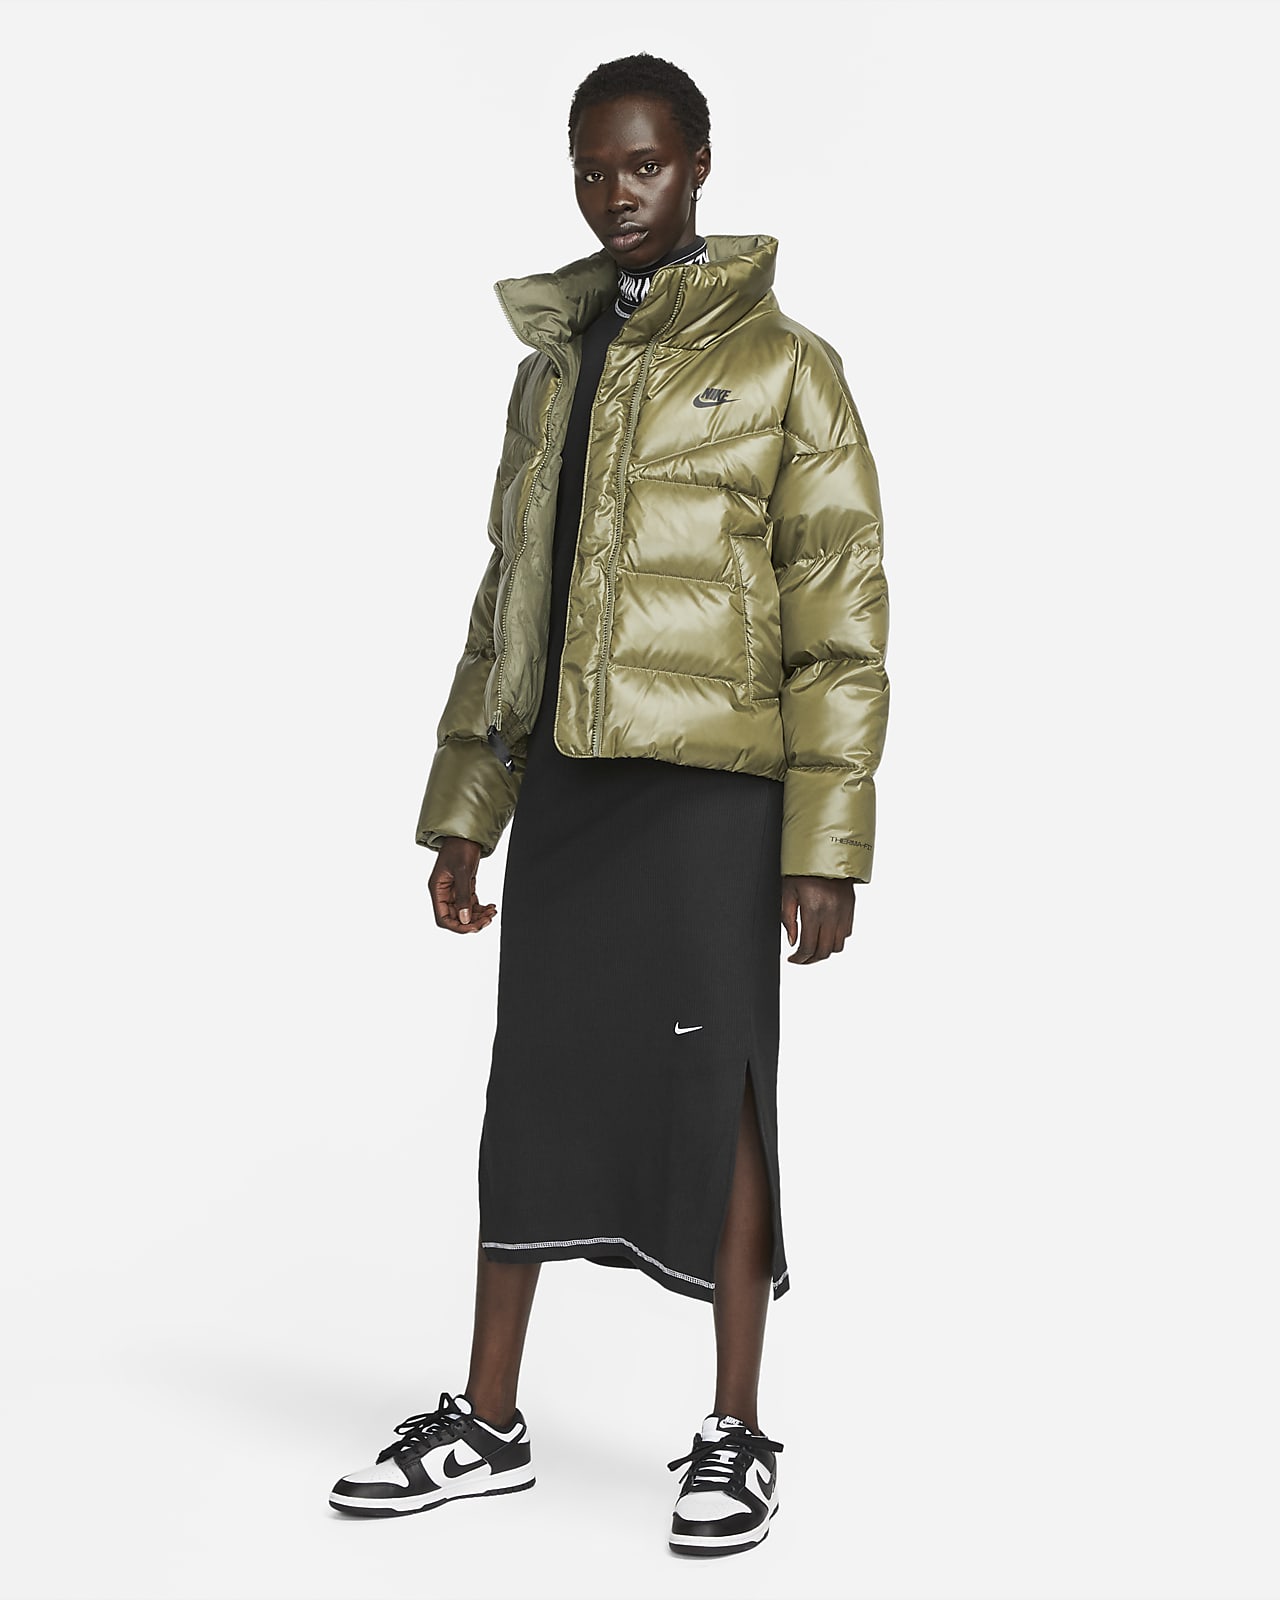 Nike Classic Puffer Jacket – DTLR